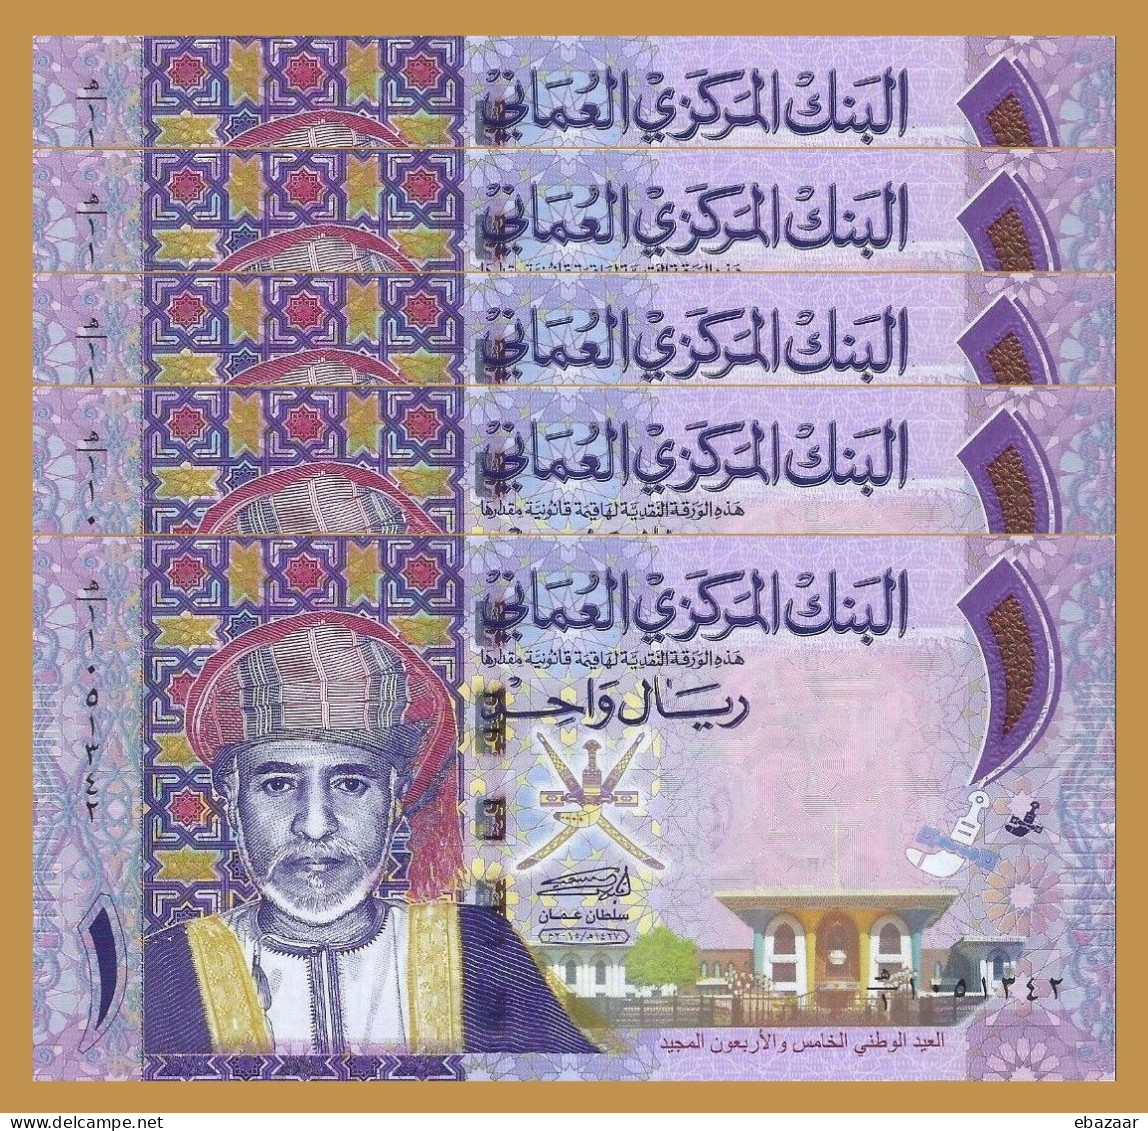 Oman 2015 Banknote 1 Rial Commemorative (45th National Day) P-48a Error AH 1427 - Withdrawn 5 Consecutive Numbers UNC - Oman